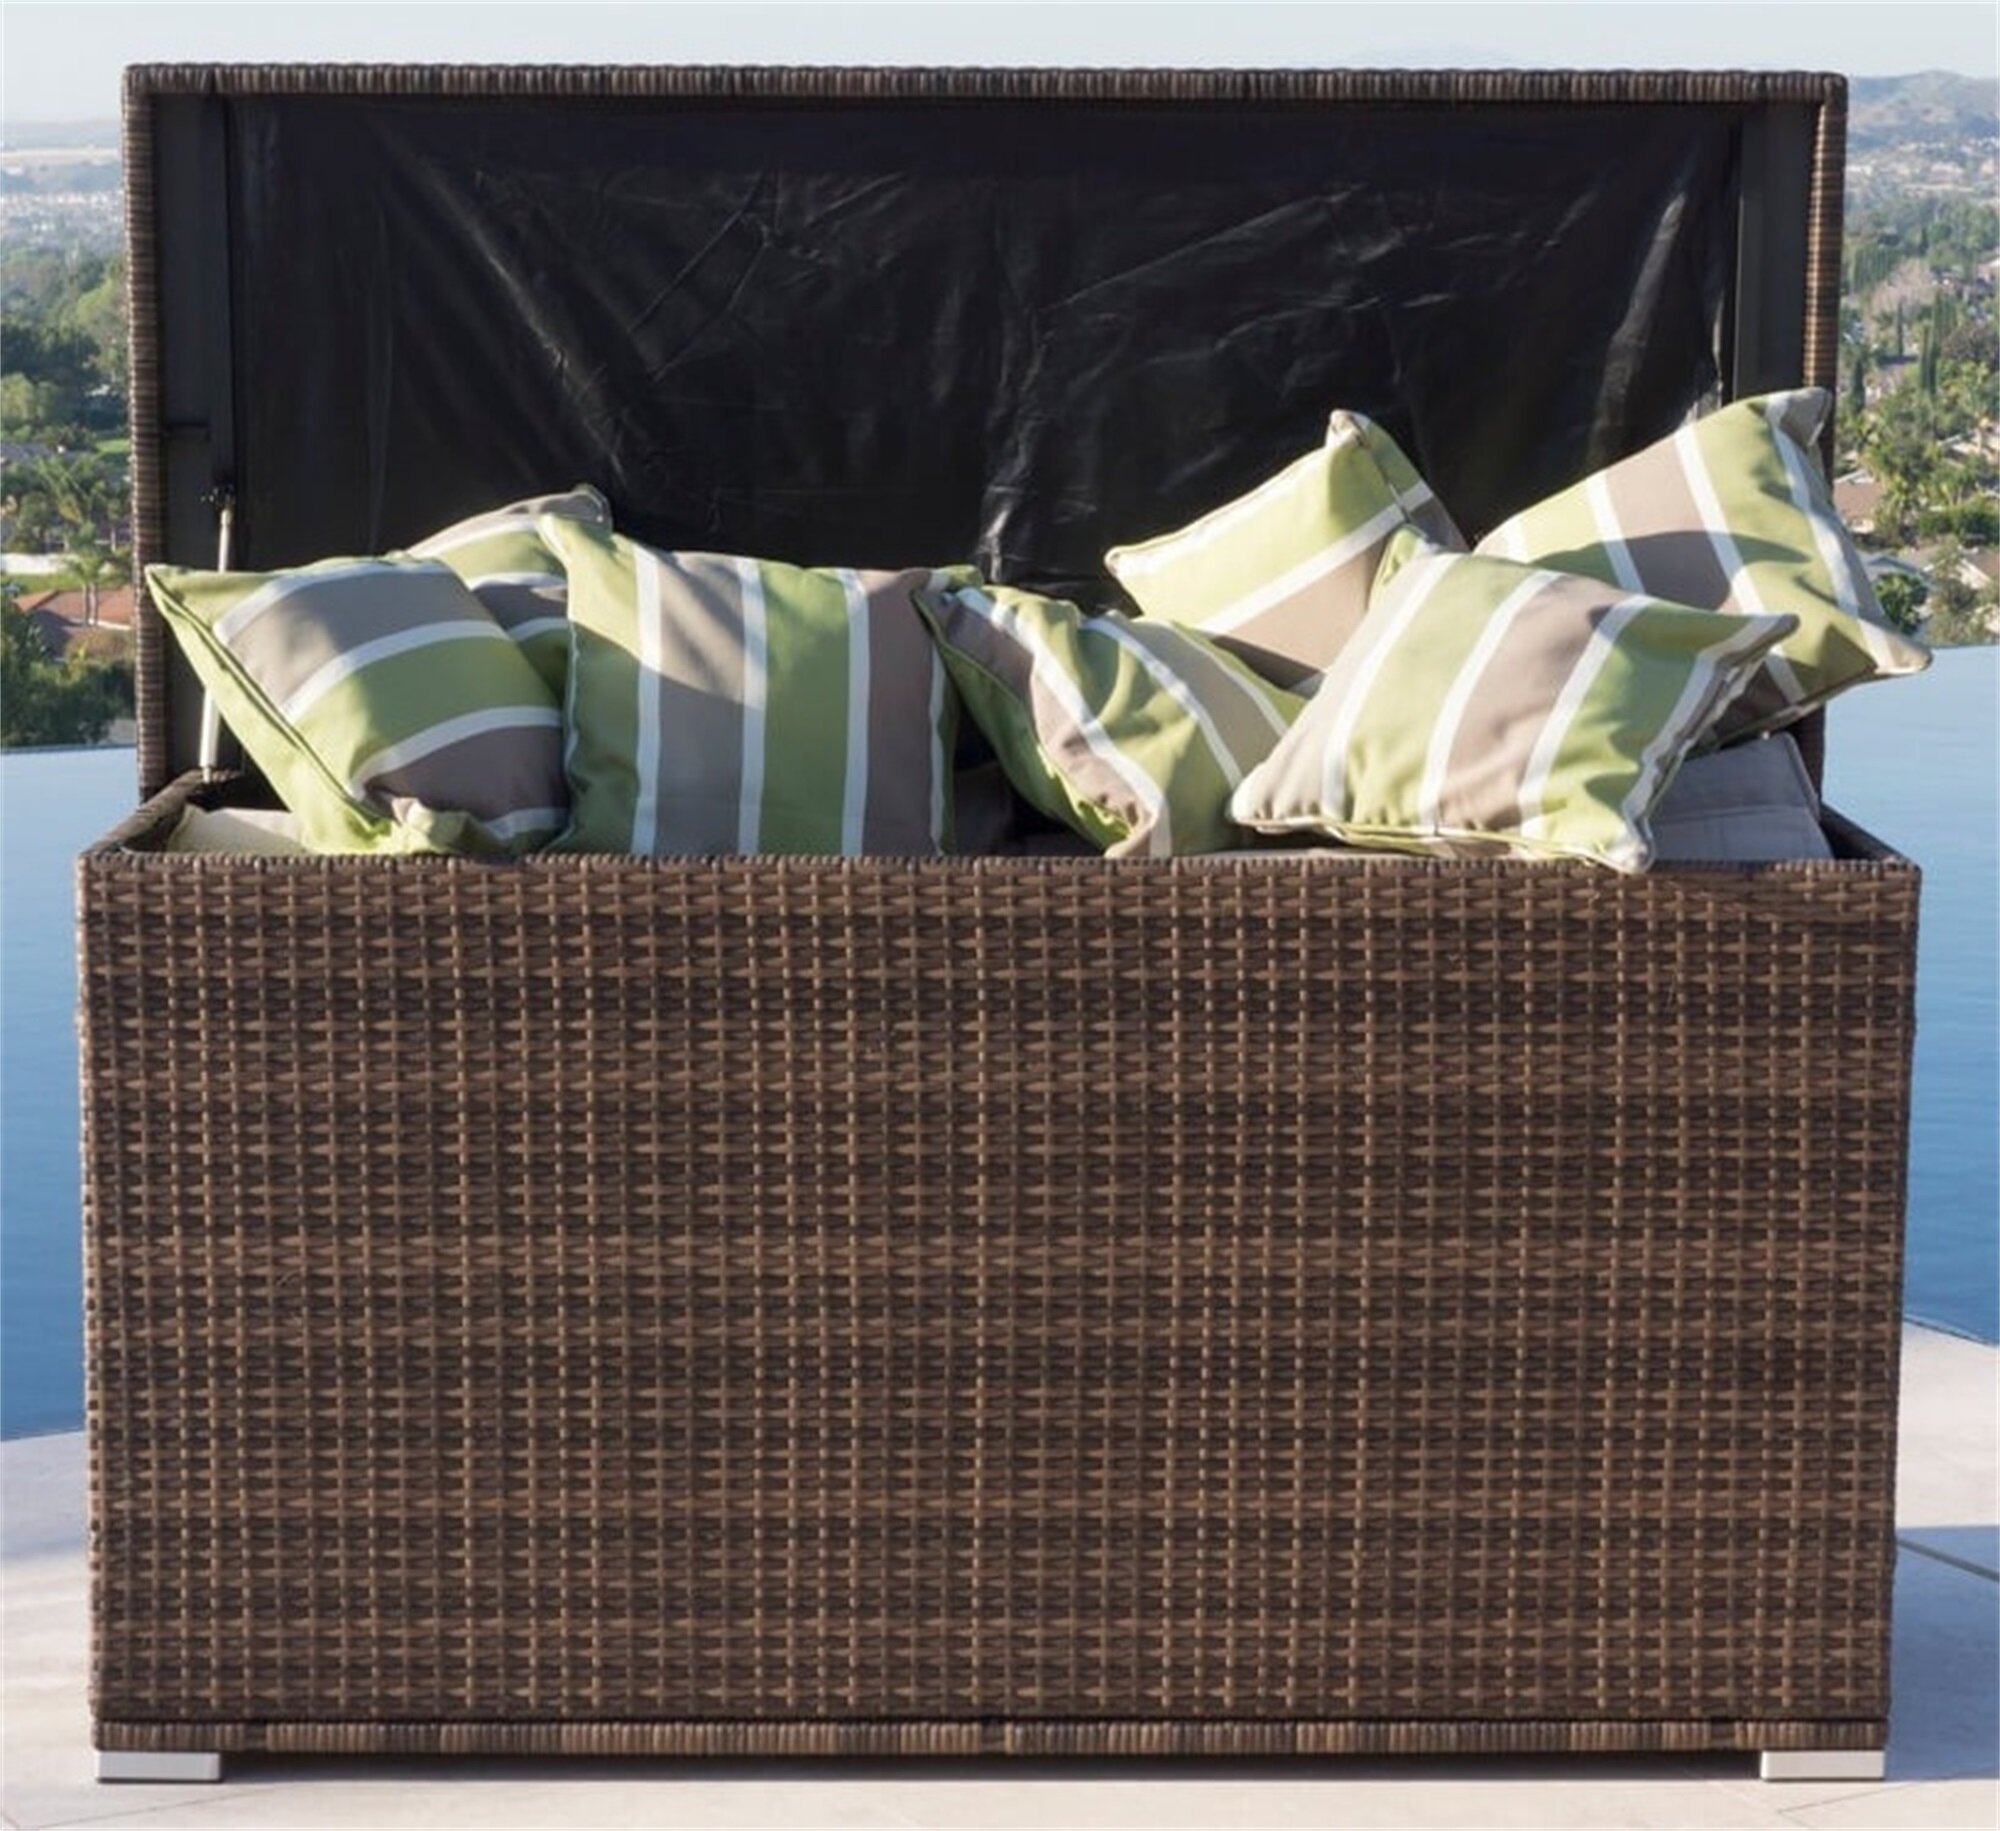 Cushions 38.7x17.3x21.7in Anthracite Outdoor Pool Patio Furniture for Patio Cushions and Gardening Tools Patio Storage Deck Box Estink Garden Storage Box Container 